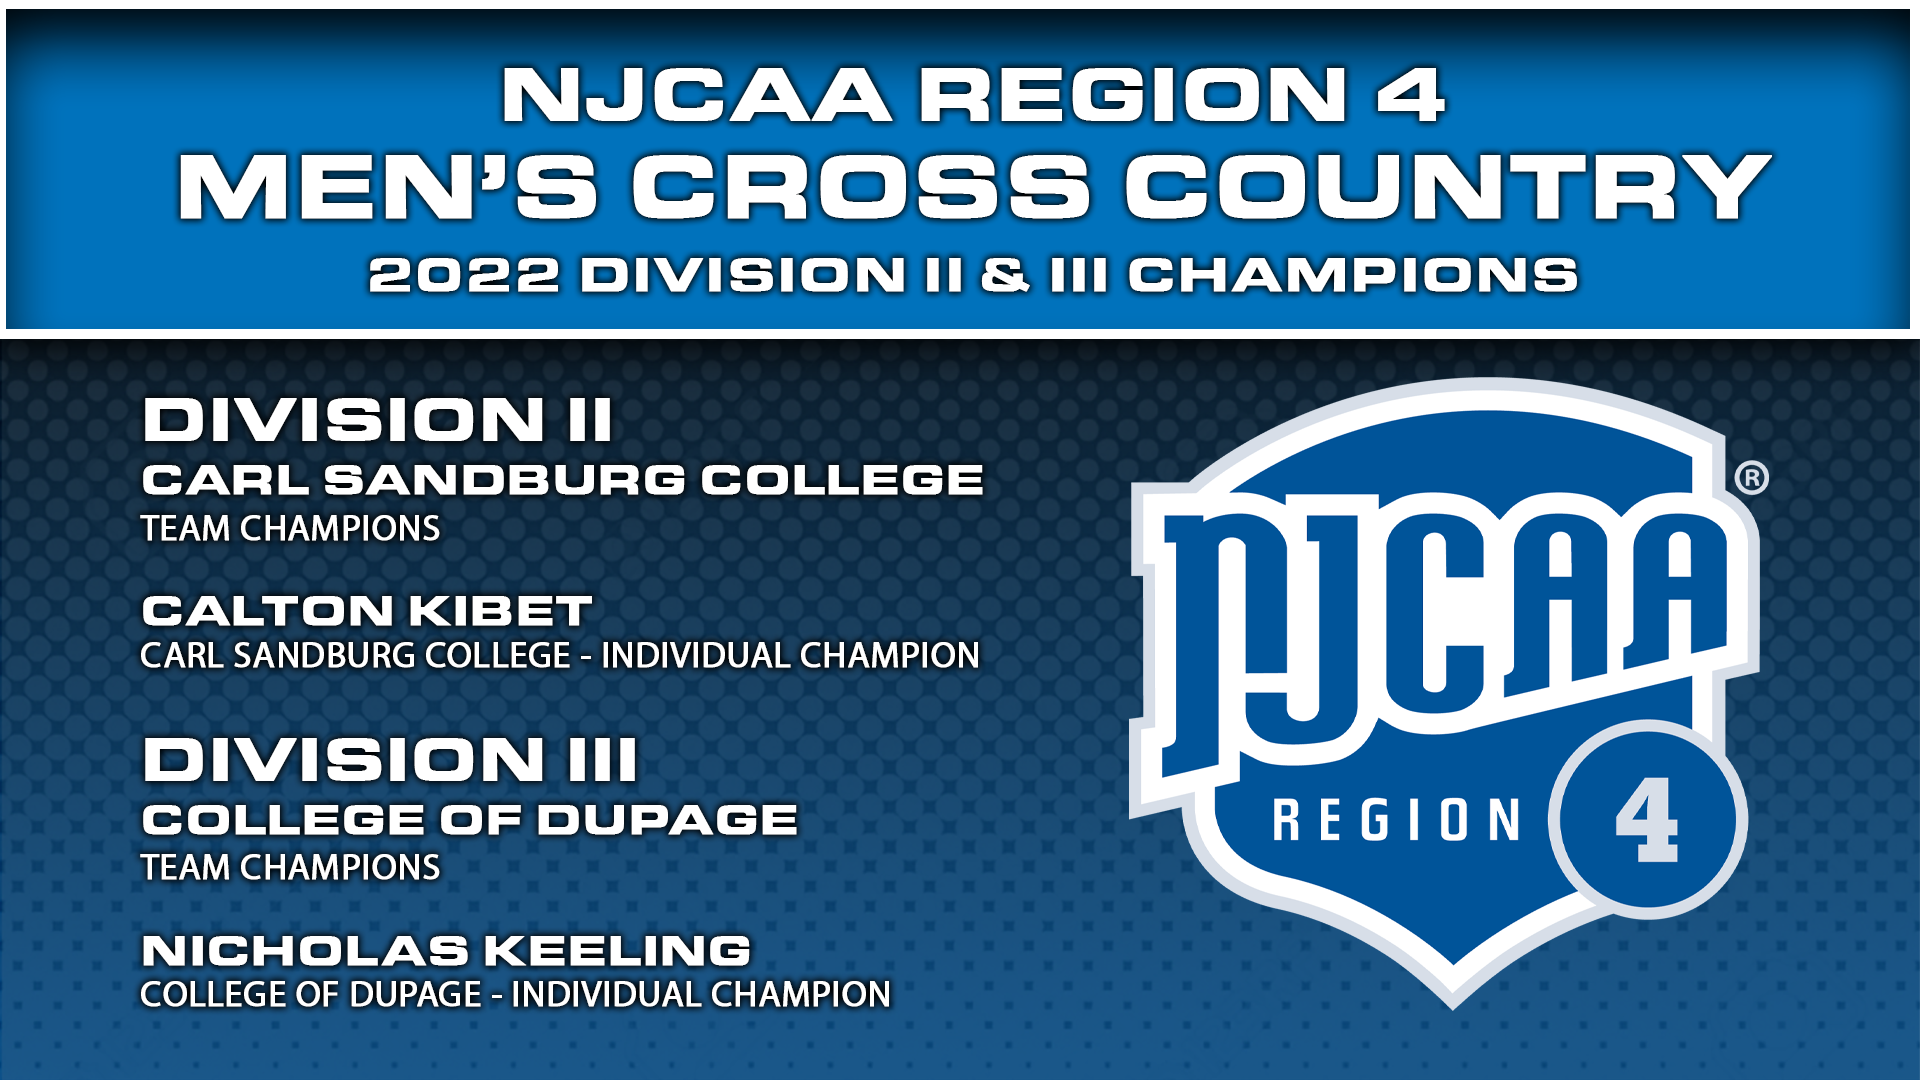 DuPage claims men's cross country national title, repeats as Region 4 champ with Carl Sandburg